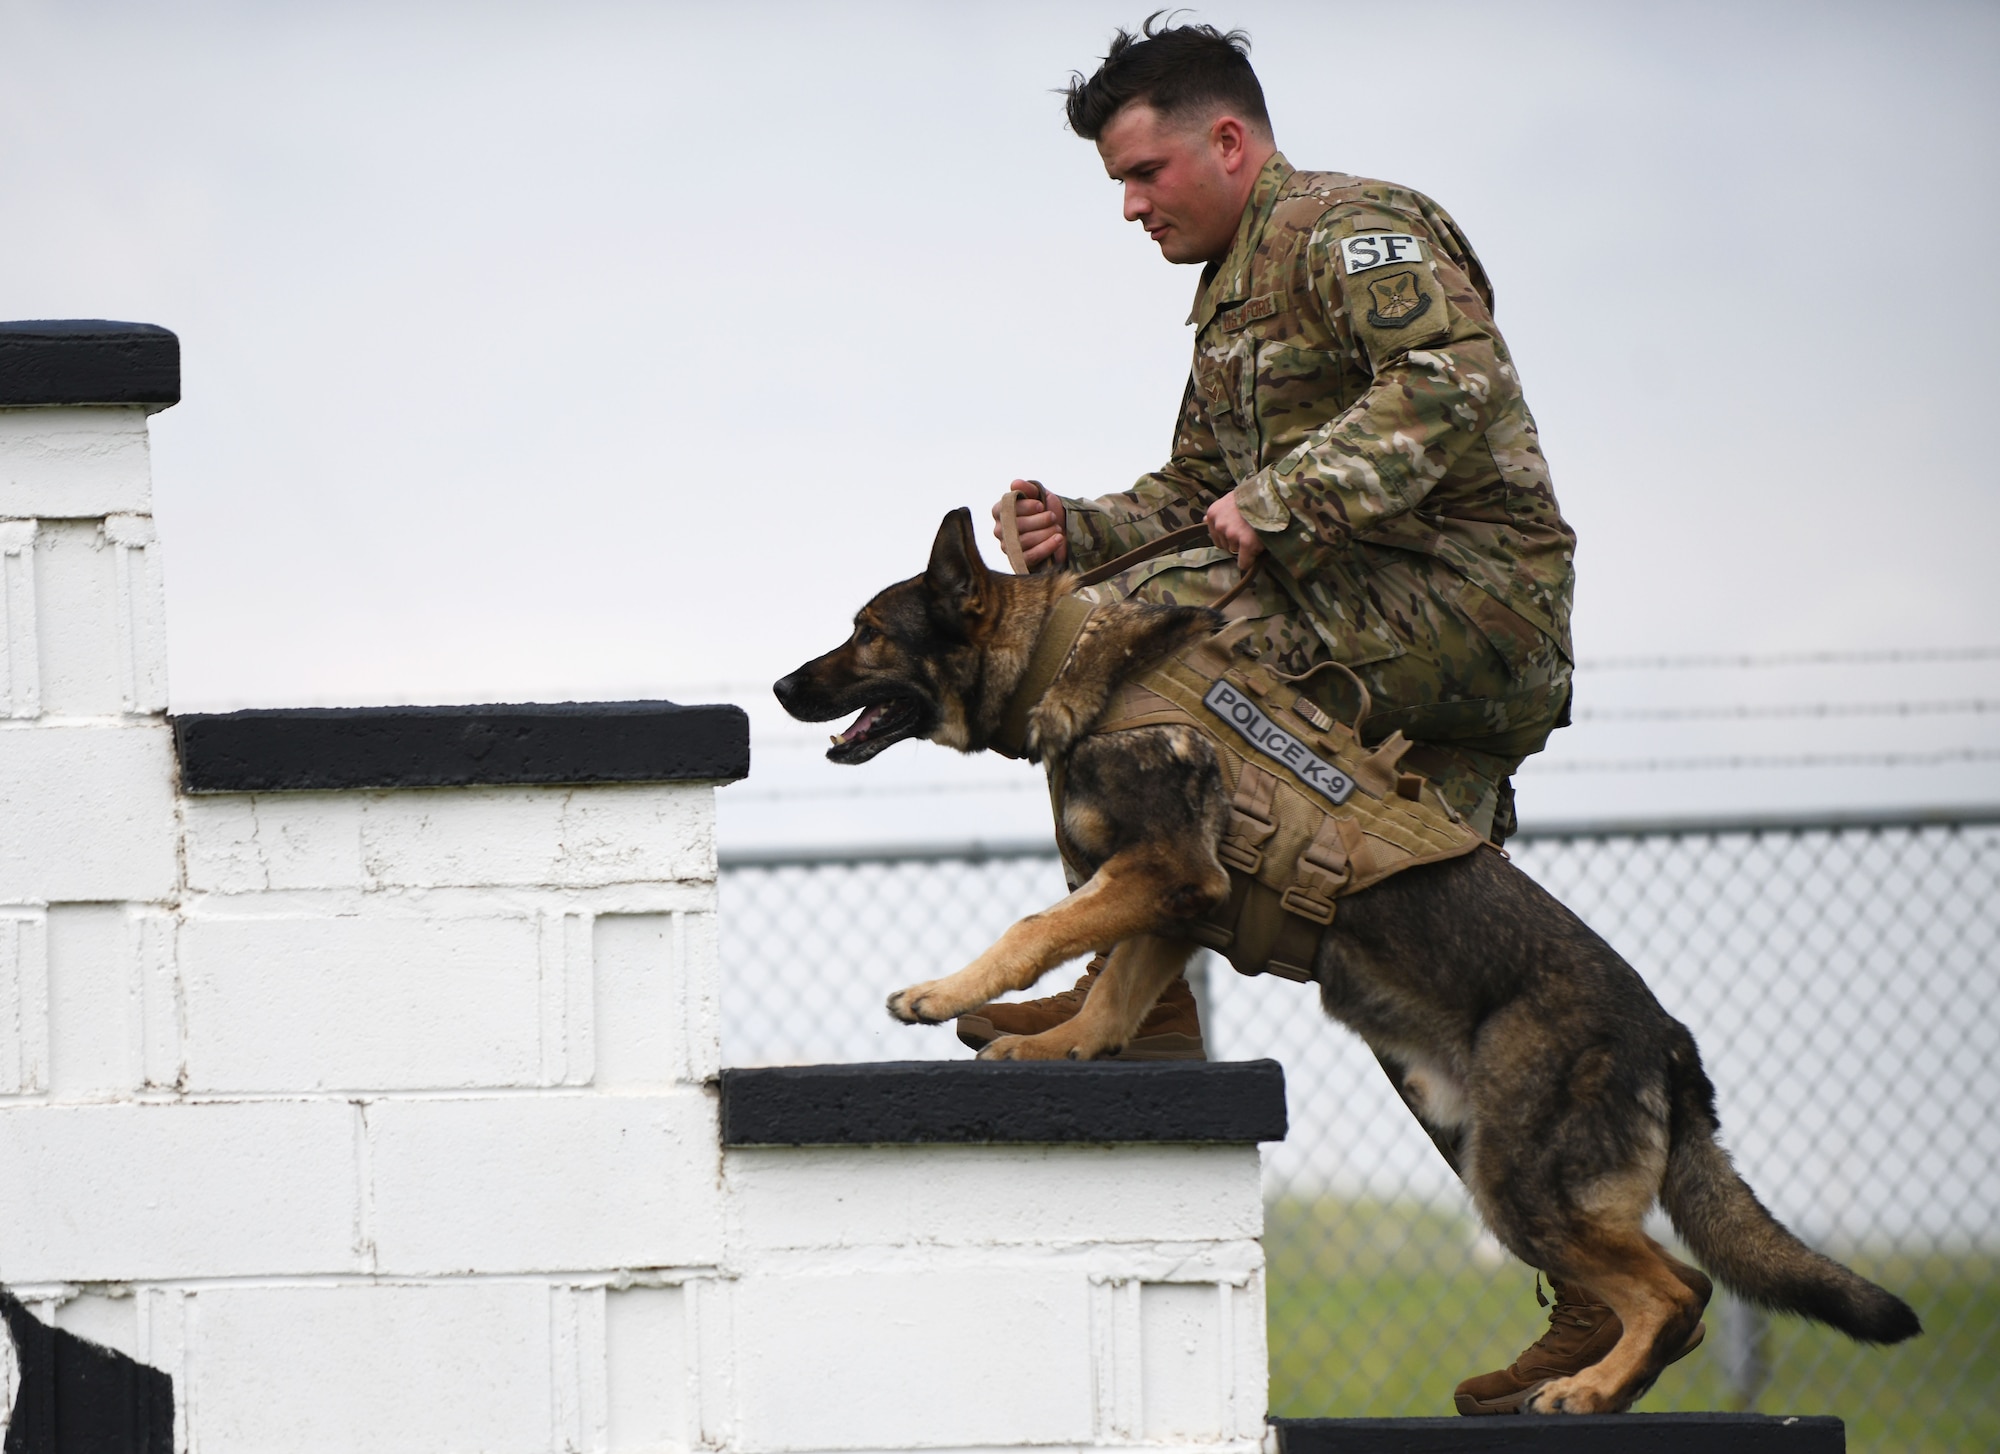 Senior Airman Chase Loggins, a 28th Security Forces Squadron military working dog handler, leads MWD Boris through the obedience course on Ellsworth Air Force Base, S.D., May 16, 2019. Loggins and Boris competed against a police K-9 from the South Dakota Highway Patrol, in recognition of National Police Week. The dogs had to complete the obstacle course without being distracted by the plethora of toys planted throughout the course.  (U.S. Air Force photo by Airman 1st Class Christina Bennett)